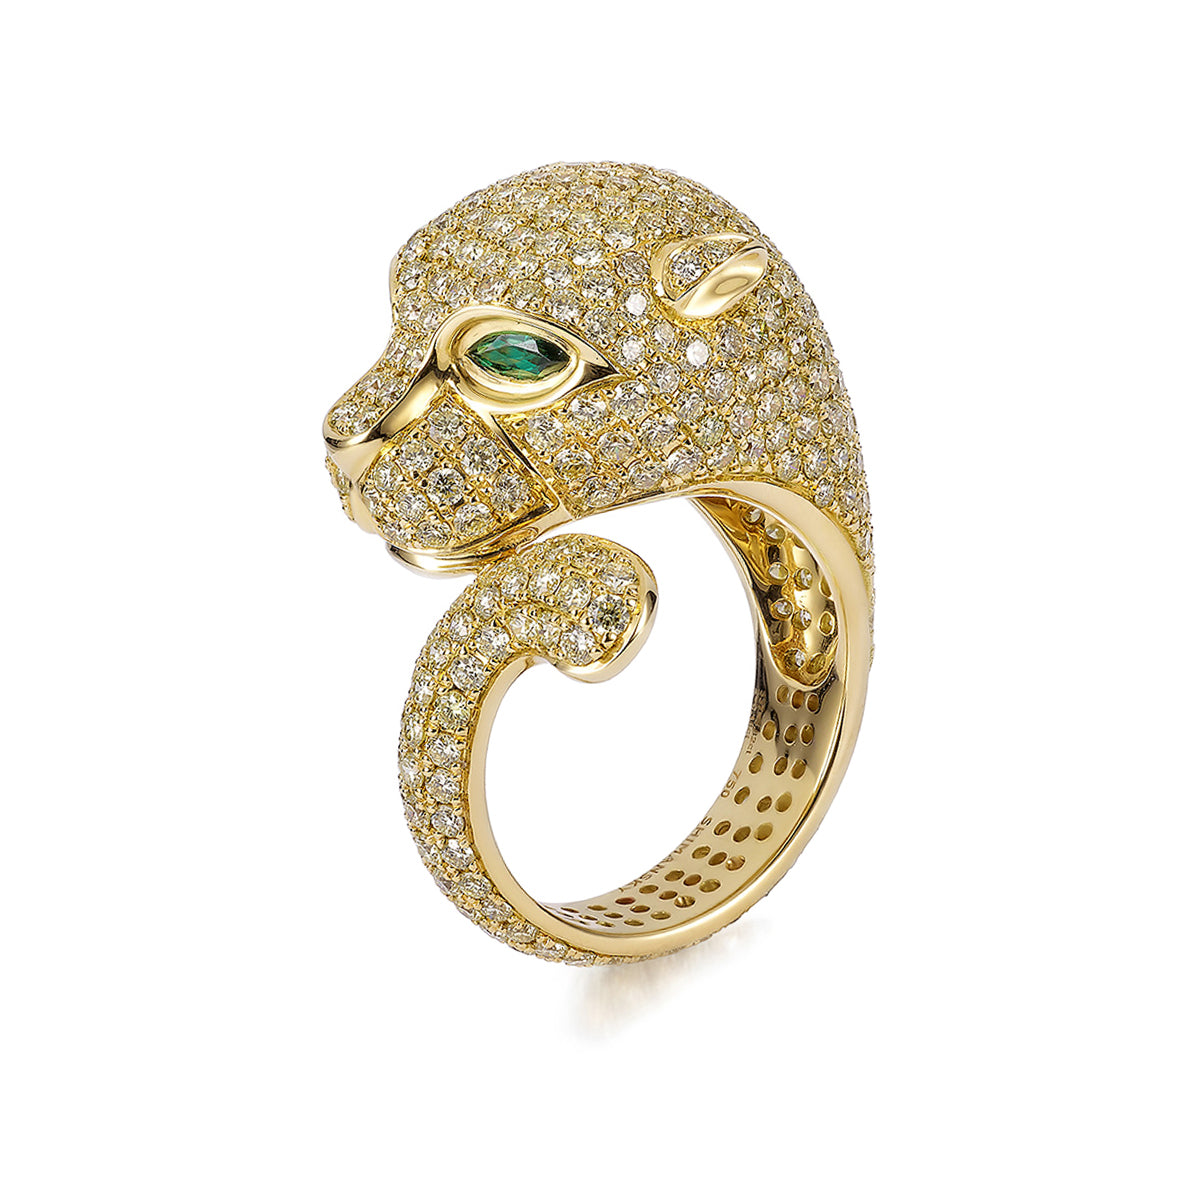 Diamond and Tsavorite Panther Ring In 18K Yellow Gold Profile View